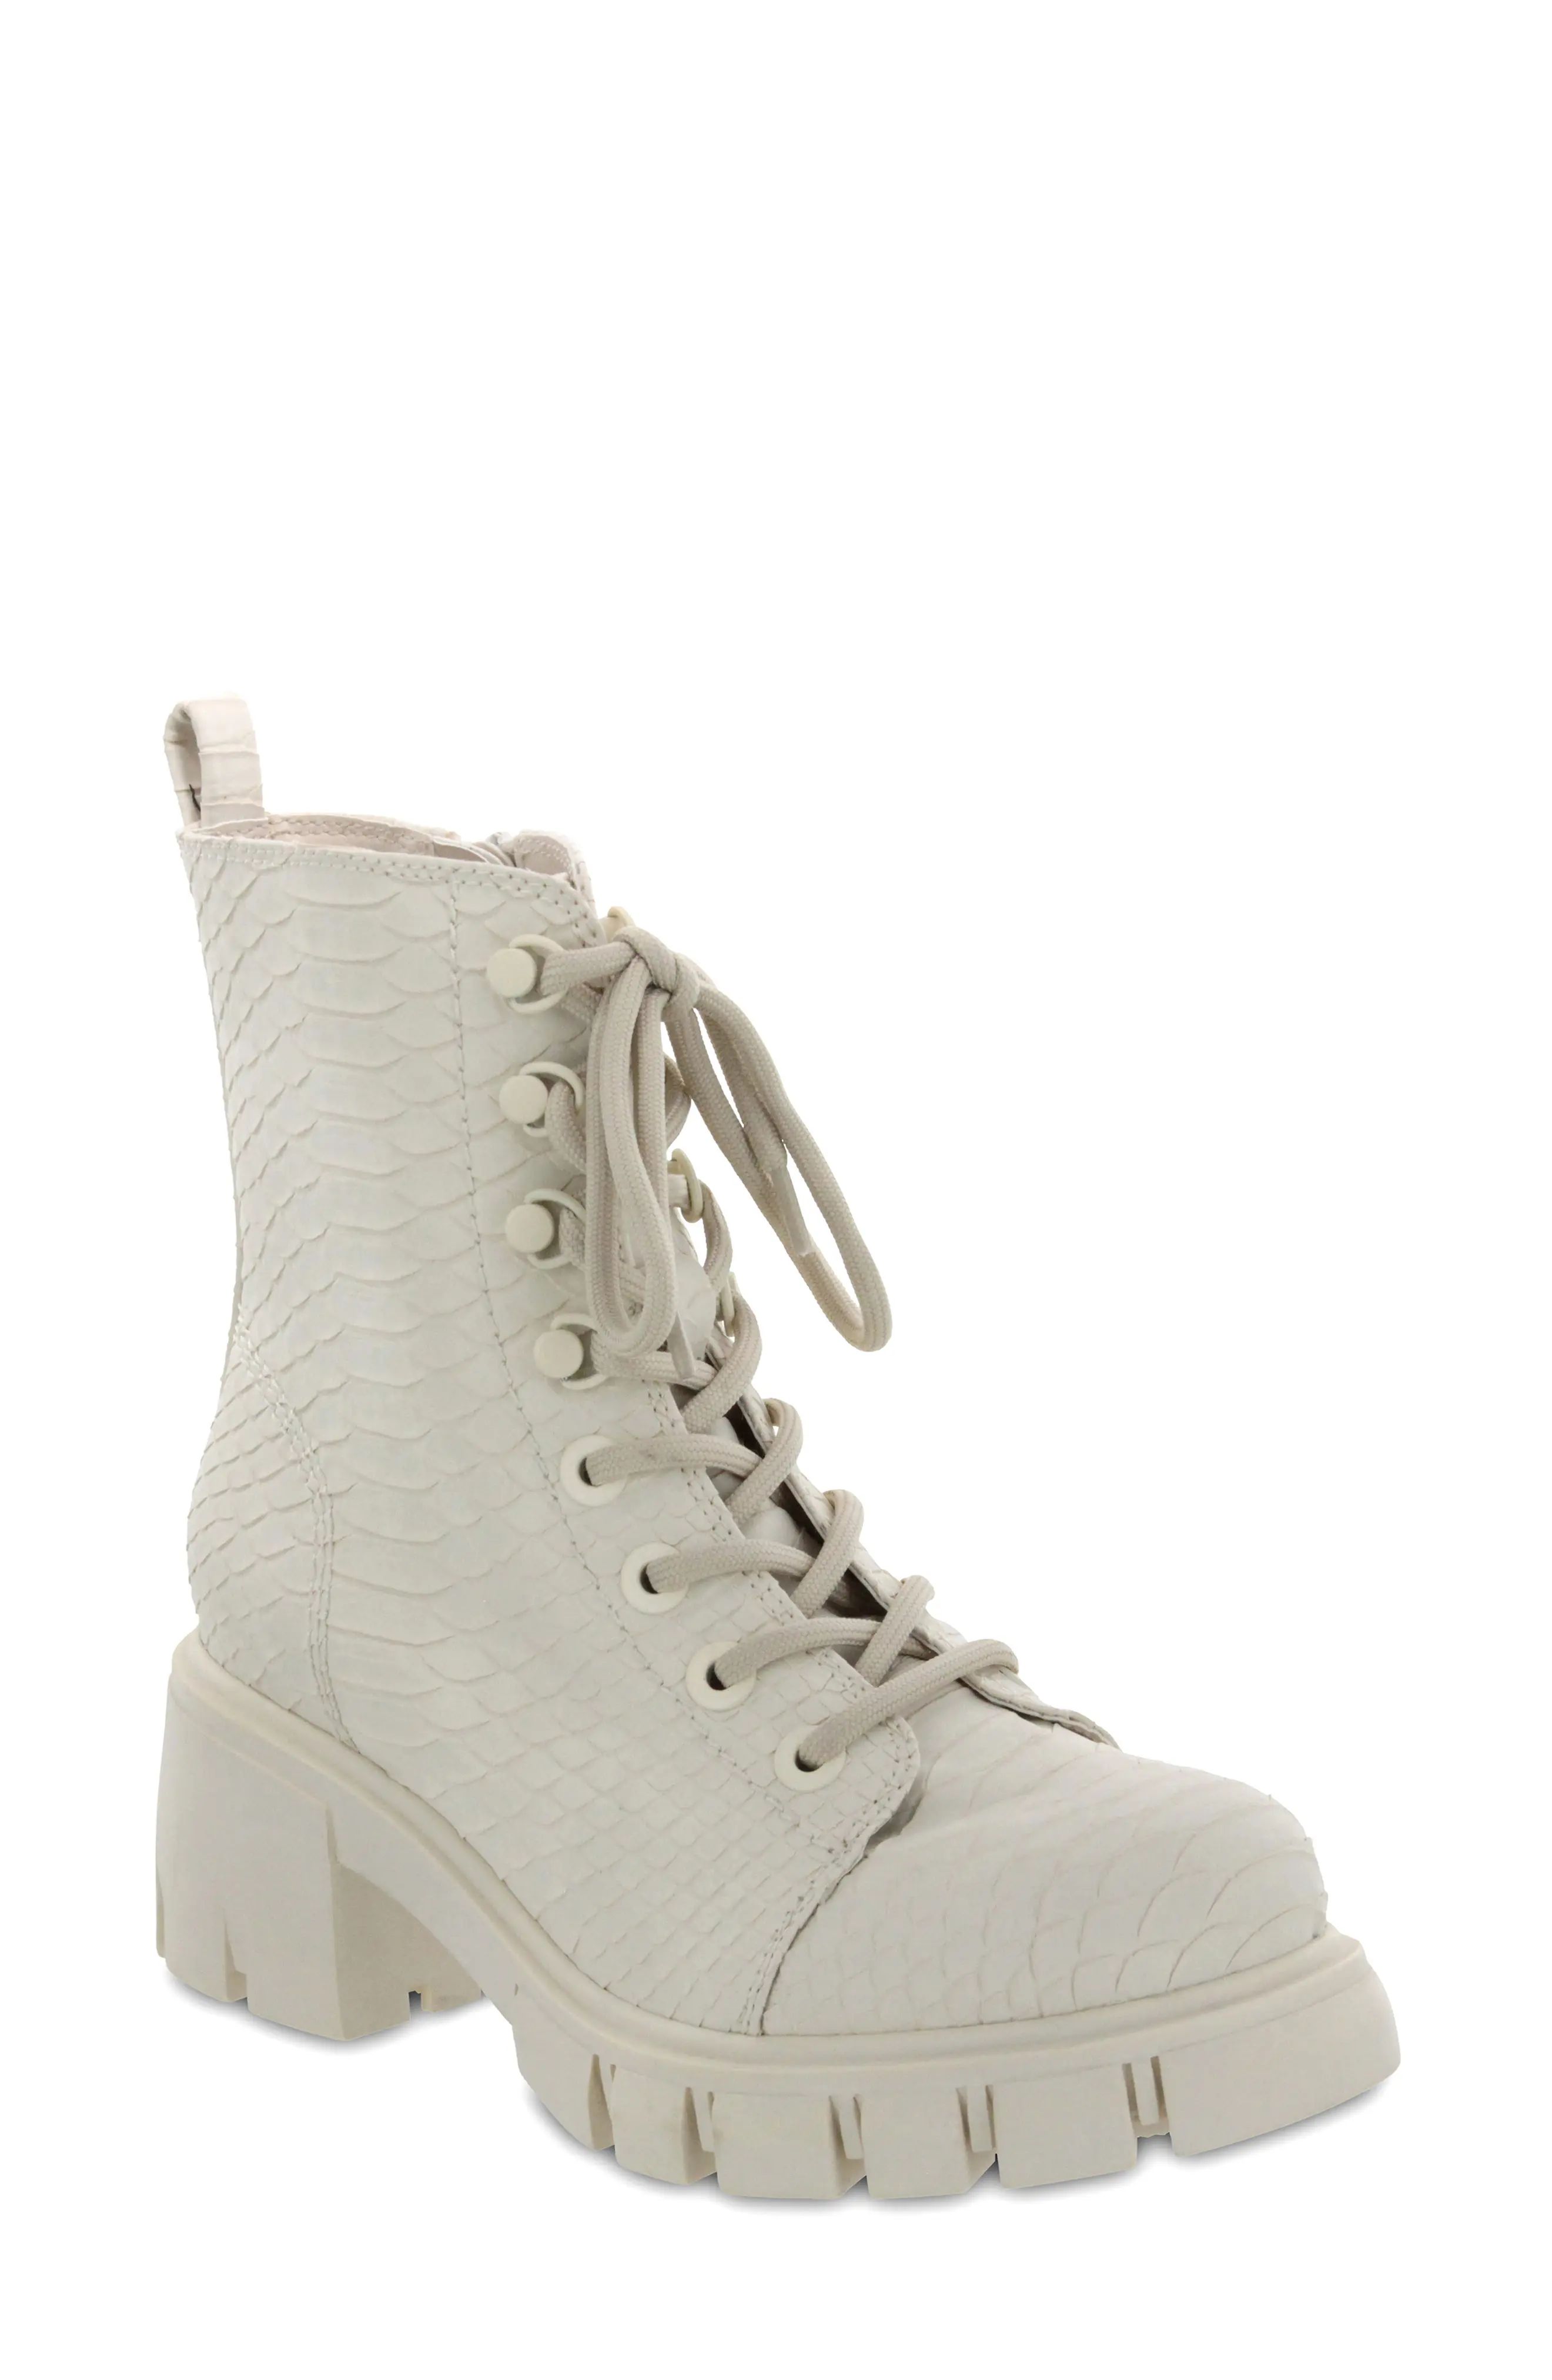 MIA Mila Combat Boot in Ivory Pyth at Nordstrom, Size 8 | Nordstrom